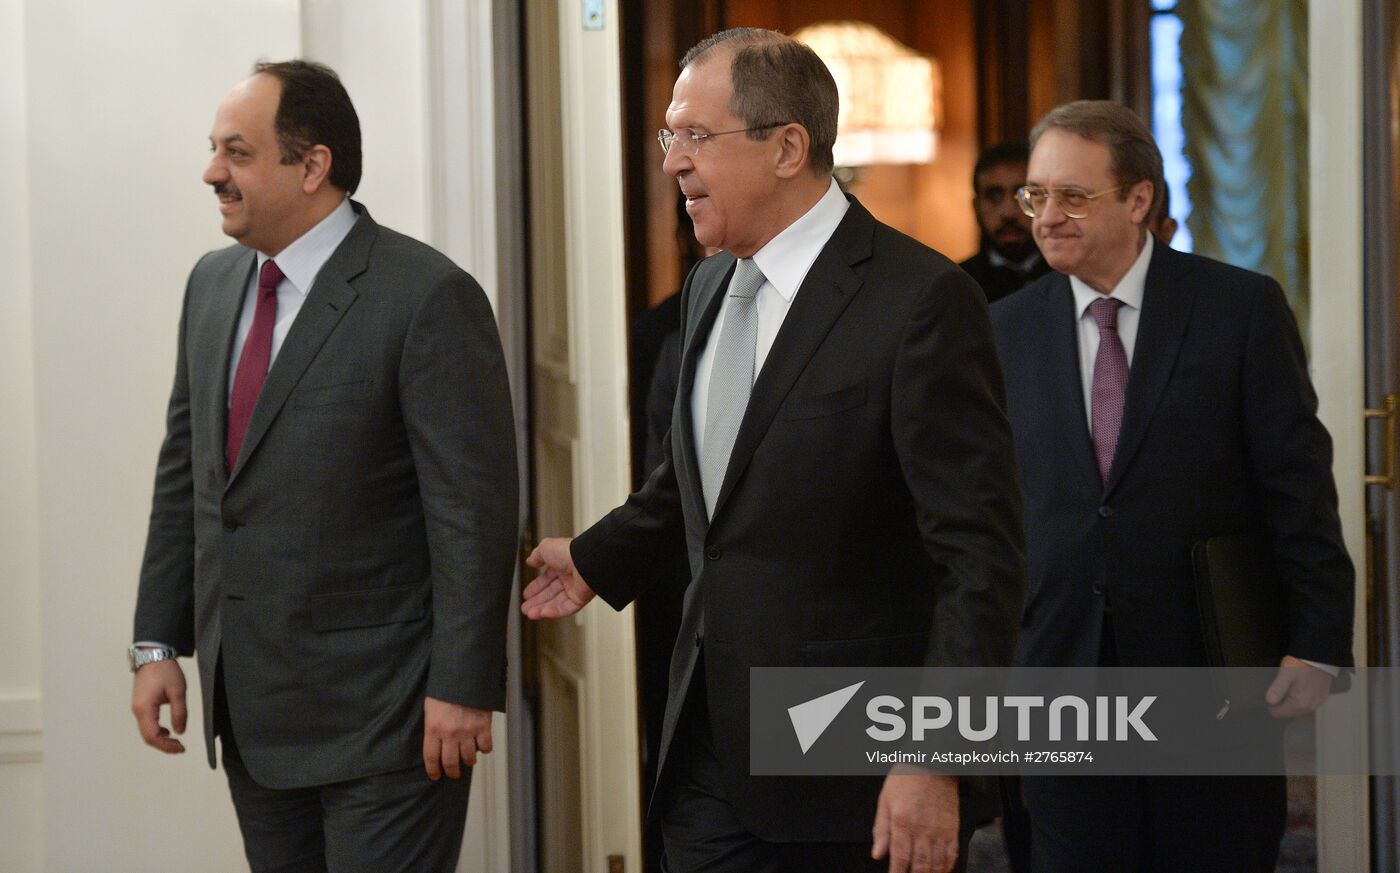 Foreign Minister Sergei Lavrov meets with Qatarian countyerpart